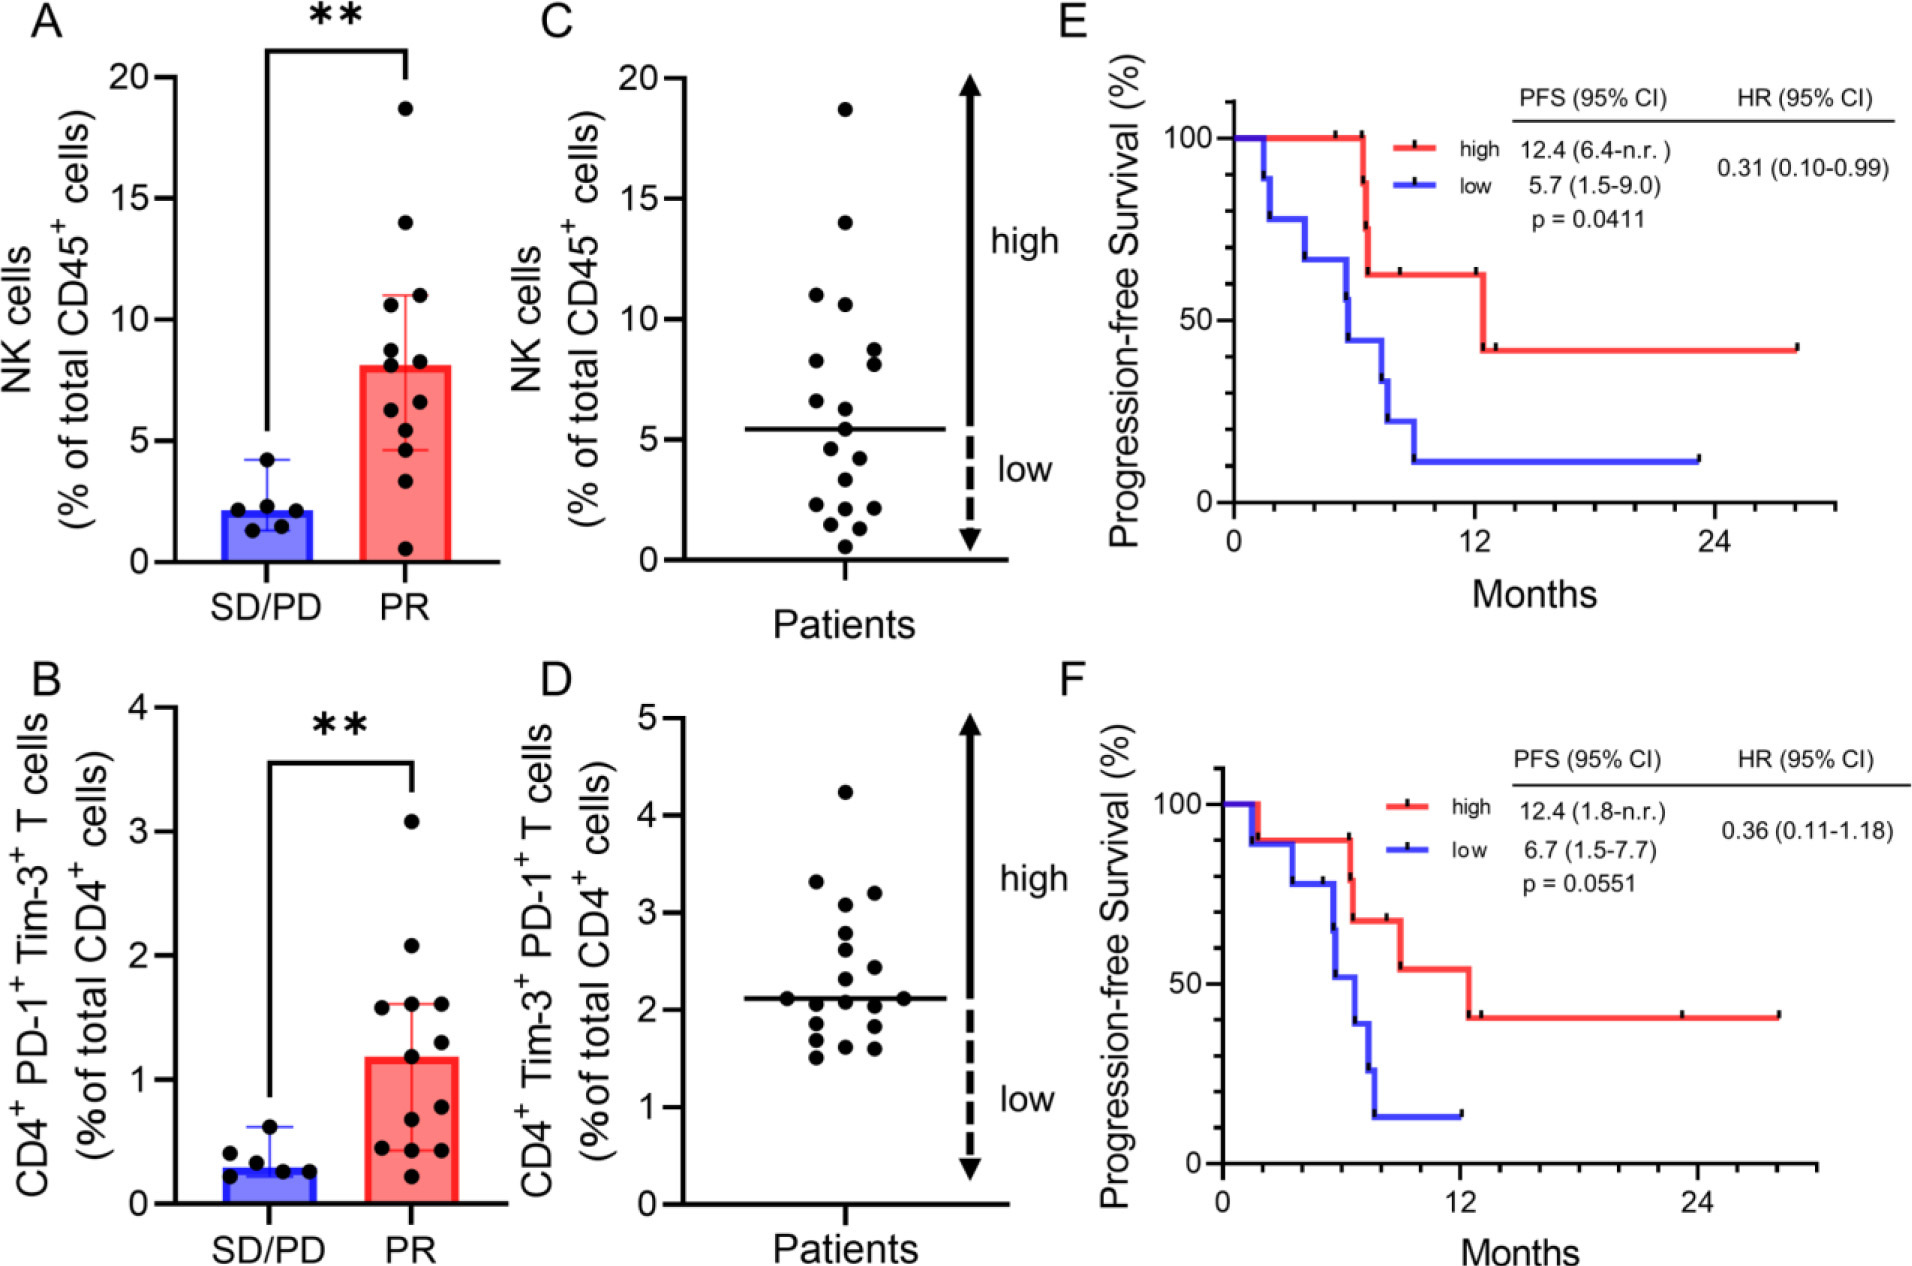 Peripheral NK cells and CD4 +  PD-1 + Tim-3 +  cells predict clinical efficacy. (A, B) Percentages of NK cells within the CD45 +  population, and %CD4 + PD-1 + Tim-3 +  cells within the CD4 +  population in peripheral blood of patients with PR or SD/PD. Data are medians ± 95% CI. p-values were determined using the Mann–Whitney U test. (C, D) Dot plots of each patient’s data. Patients were divided into higher and lower groups according to the median value (horizontal bar). (E, F) Kaplan-Meier curves of PFS for patients with higher and lower values of NK cells or CD4 + PD-1 + Tim-3 +  cells. ** P< 0.01; NK cells, natural killer cells; PFS, progression-free survival; PR, partial response; SD/PD, stable disease/progressive disease; HR, hazard ratio; CI, confidence interval.